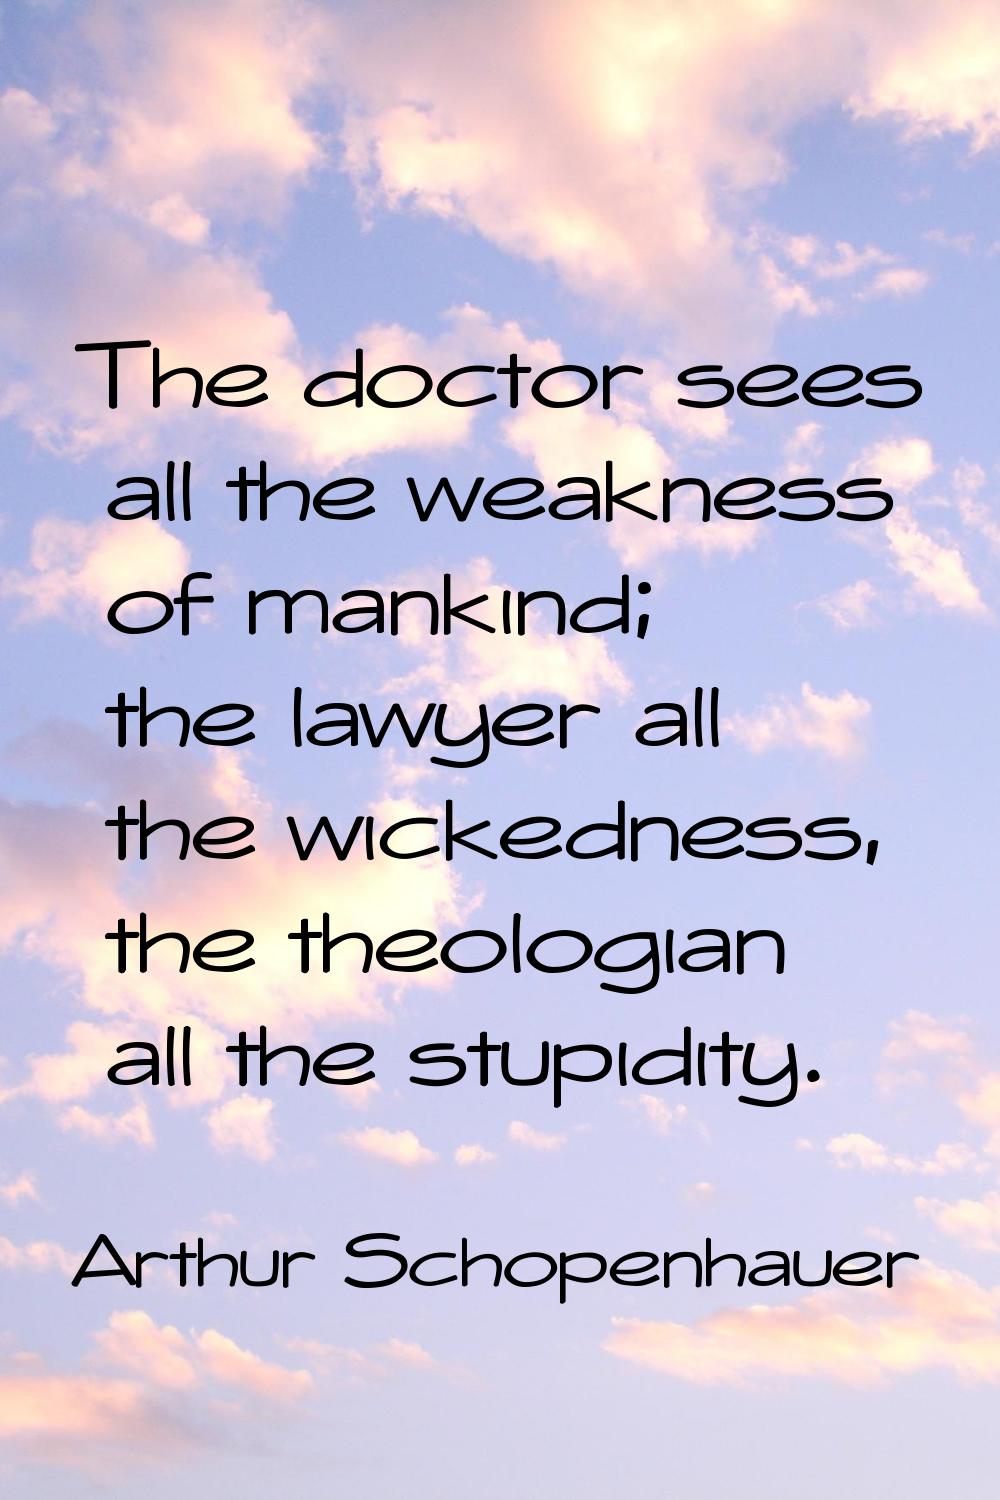 The doctor sees all the weakness of mankind; the lawyer all the wickedness, the theologian all the 